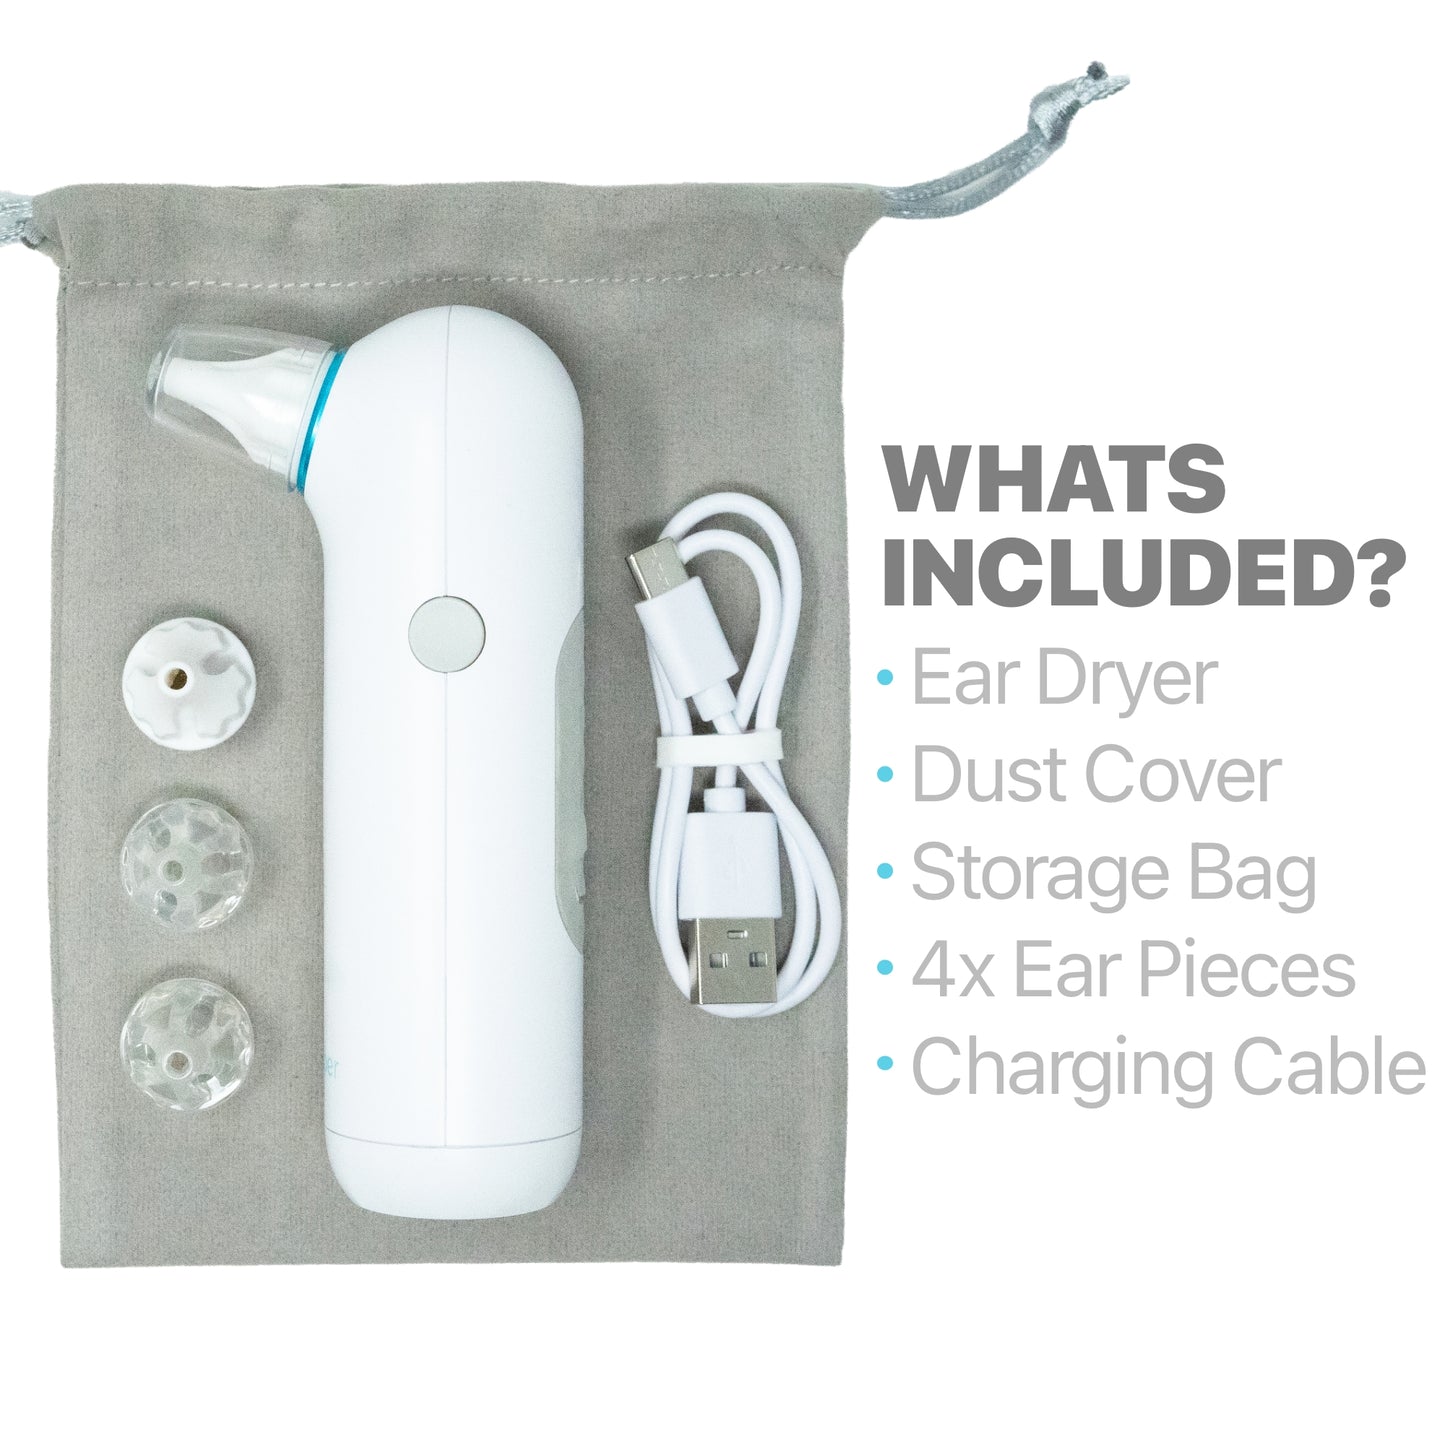 Included with Whisper Ear Dryer: dust cover, storage bag, extra ear pieces, charging cable